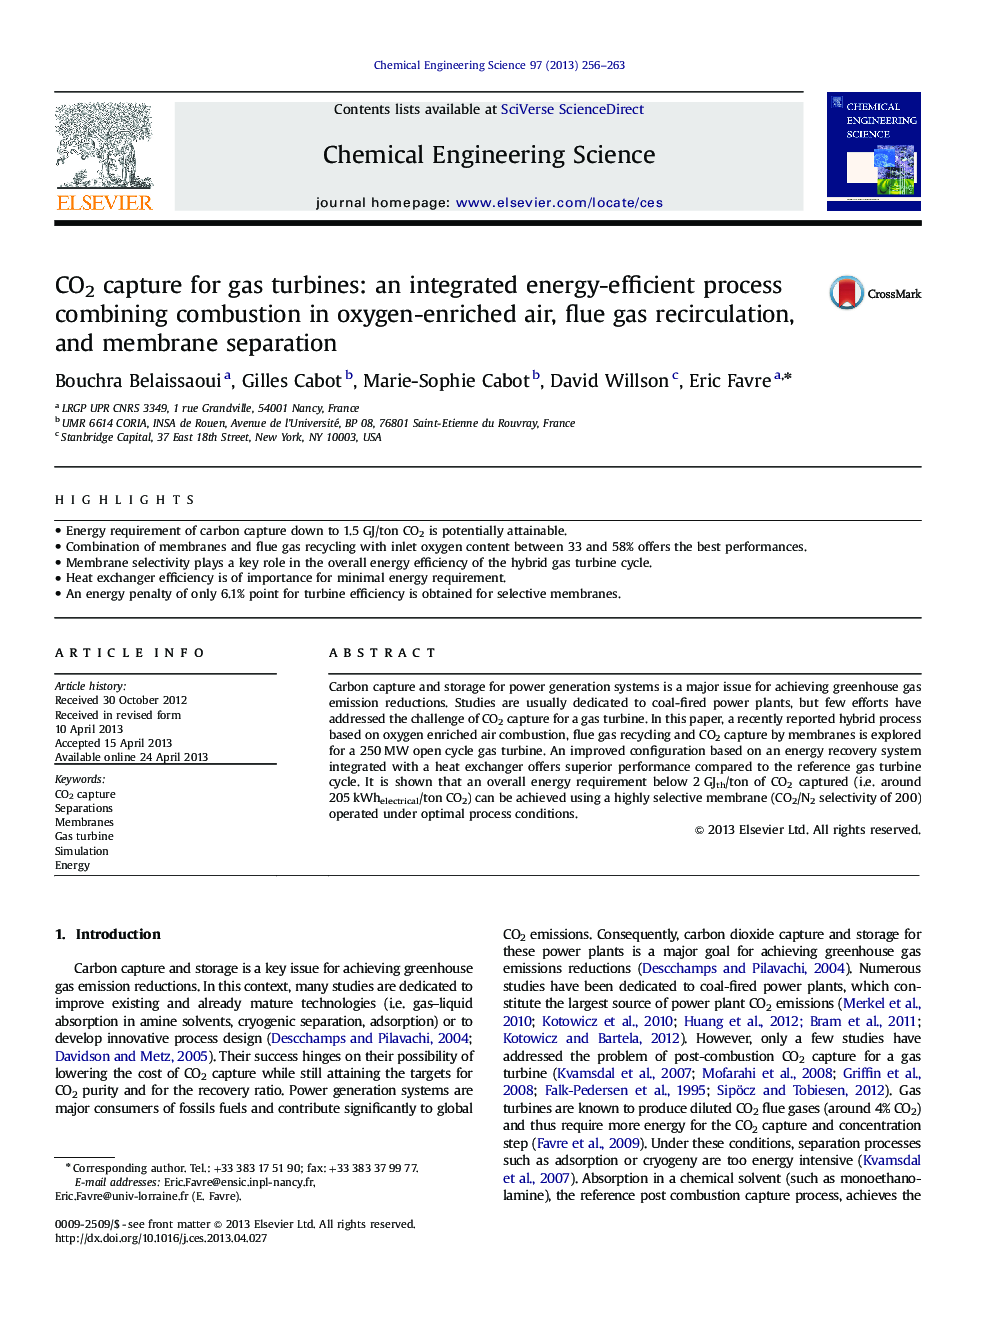 CO2 capture for gas turbines: an integrated energy-efficient process combining combustion in oxygen-enriched air, flue gas recirculation, and membrane separation